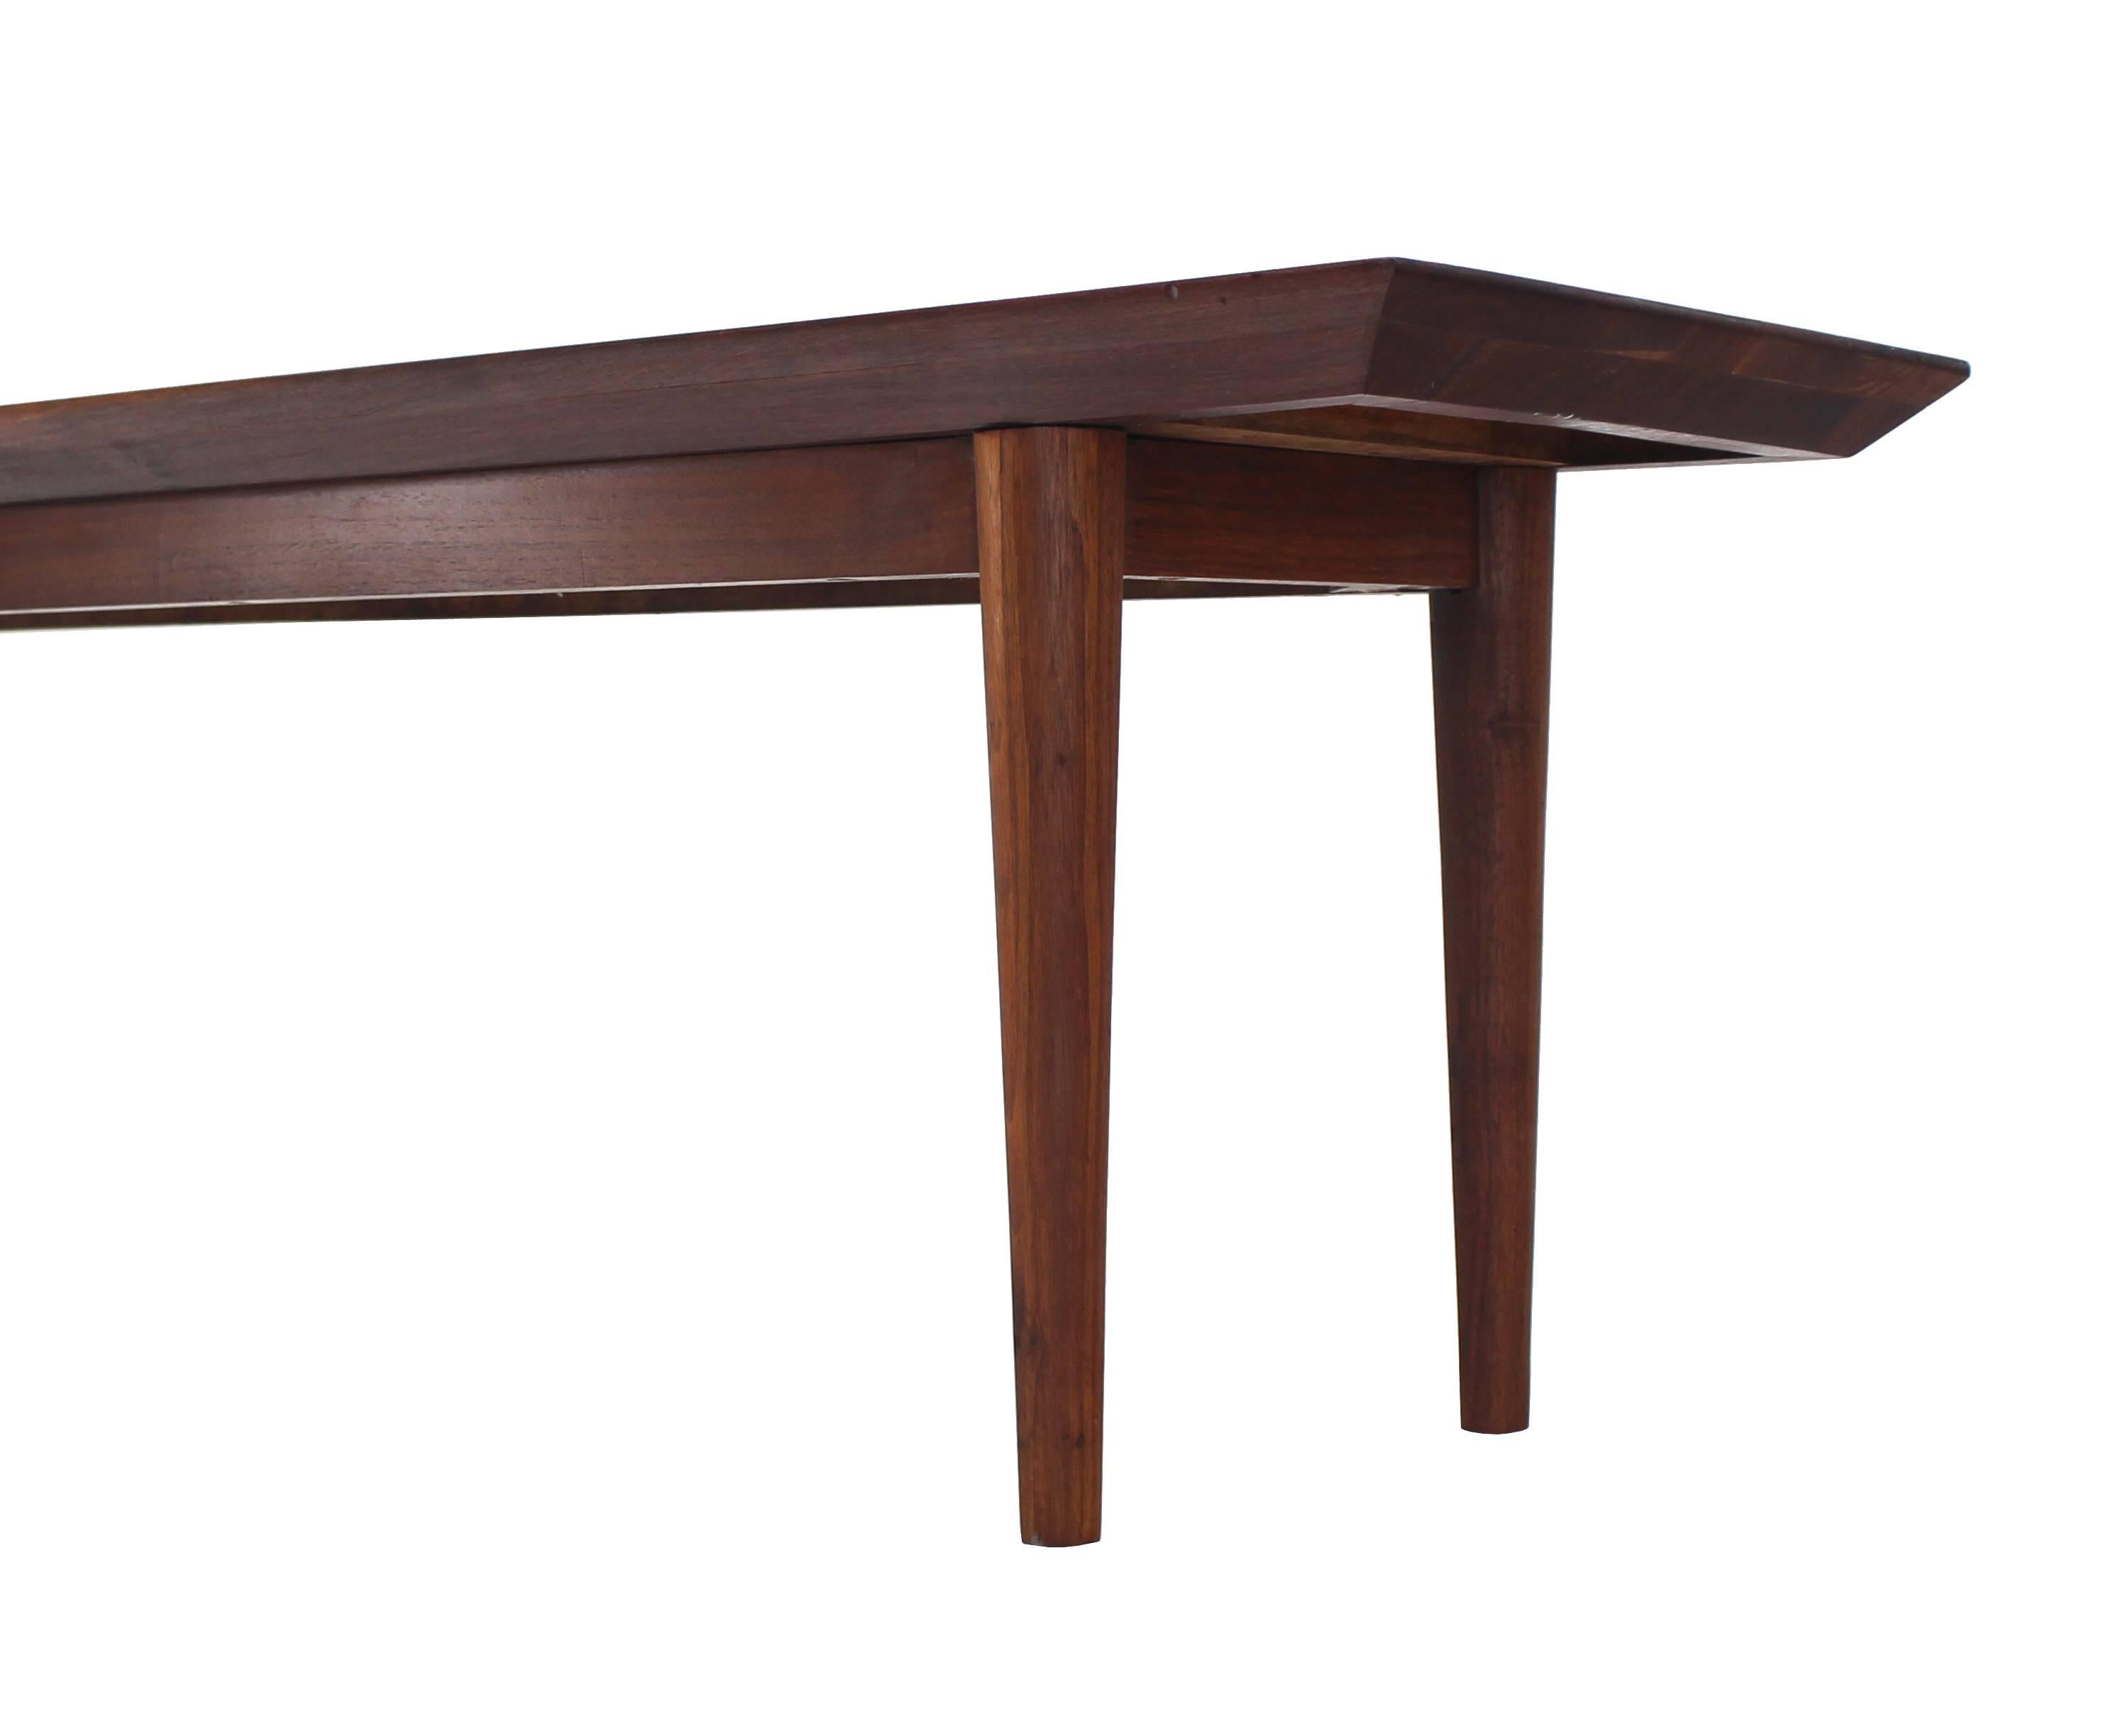 20th Century Rare Early Walnut Bench or Coffee Table by Risom For Sale